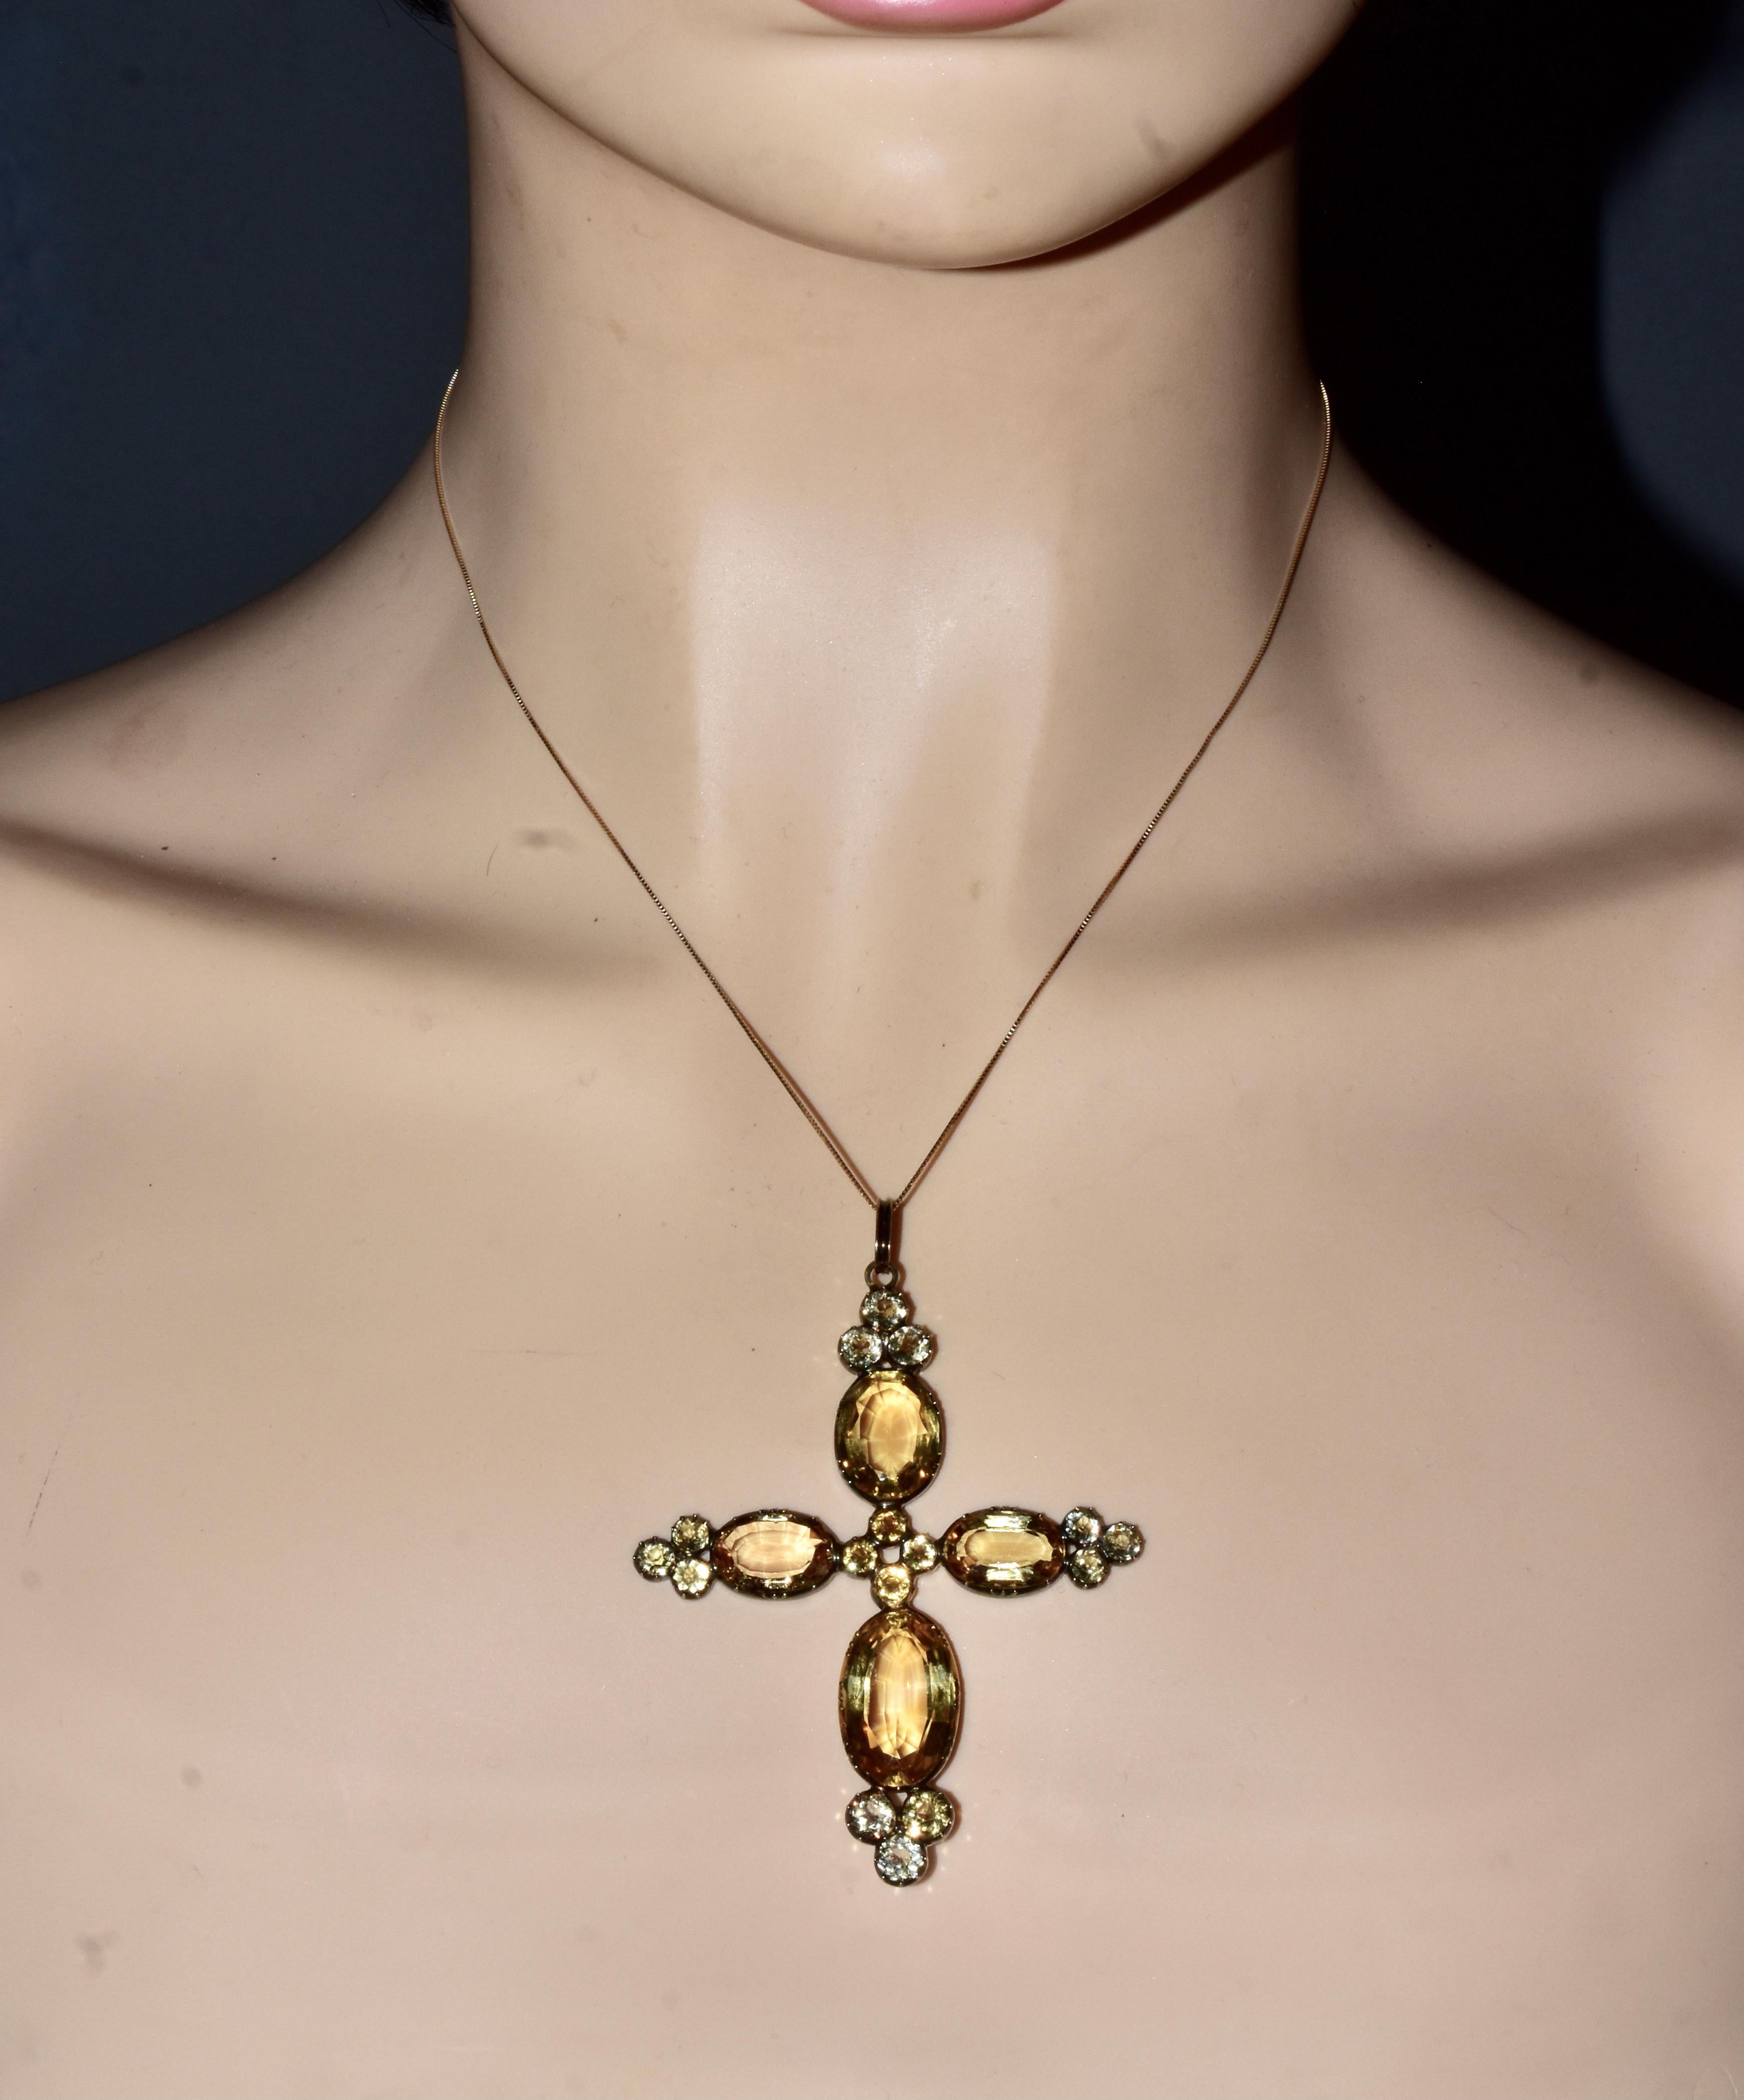 Antique Cross Early 19th Century with Fancy-Cut Citrine and Gold, circa 1840 In Excellent Condition For Sale In Aspen, CO